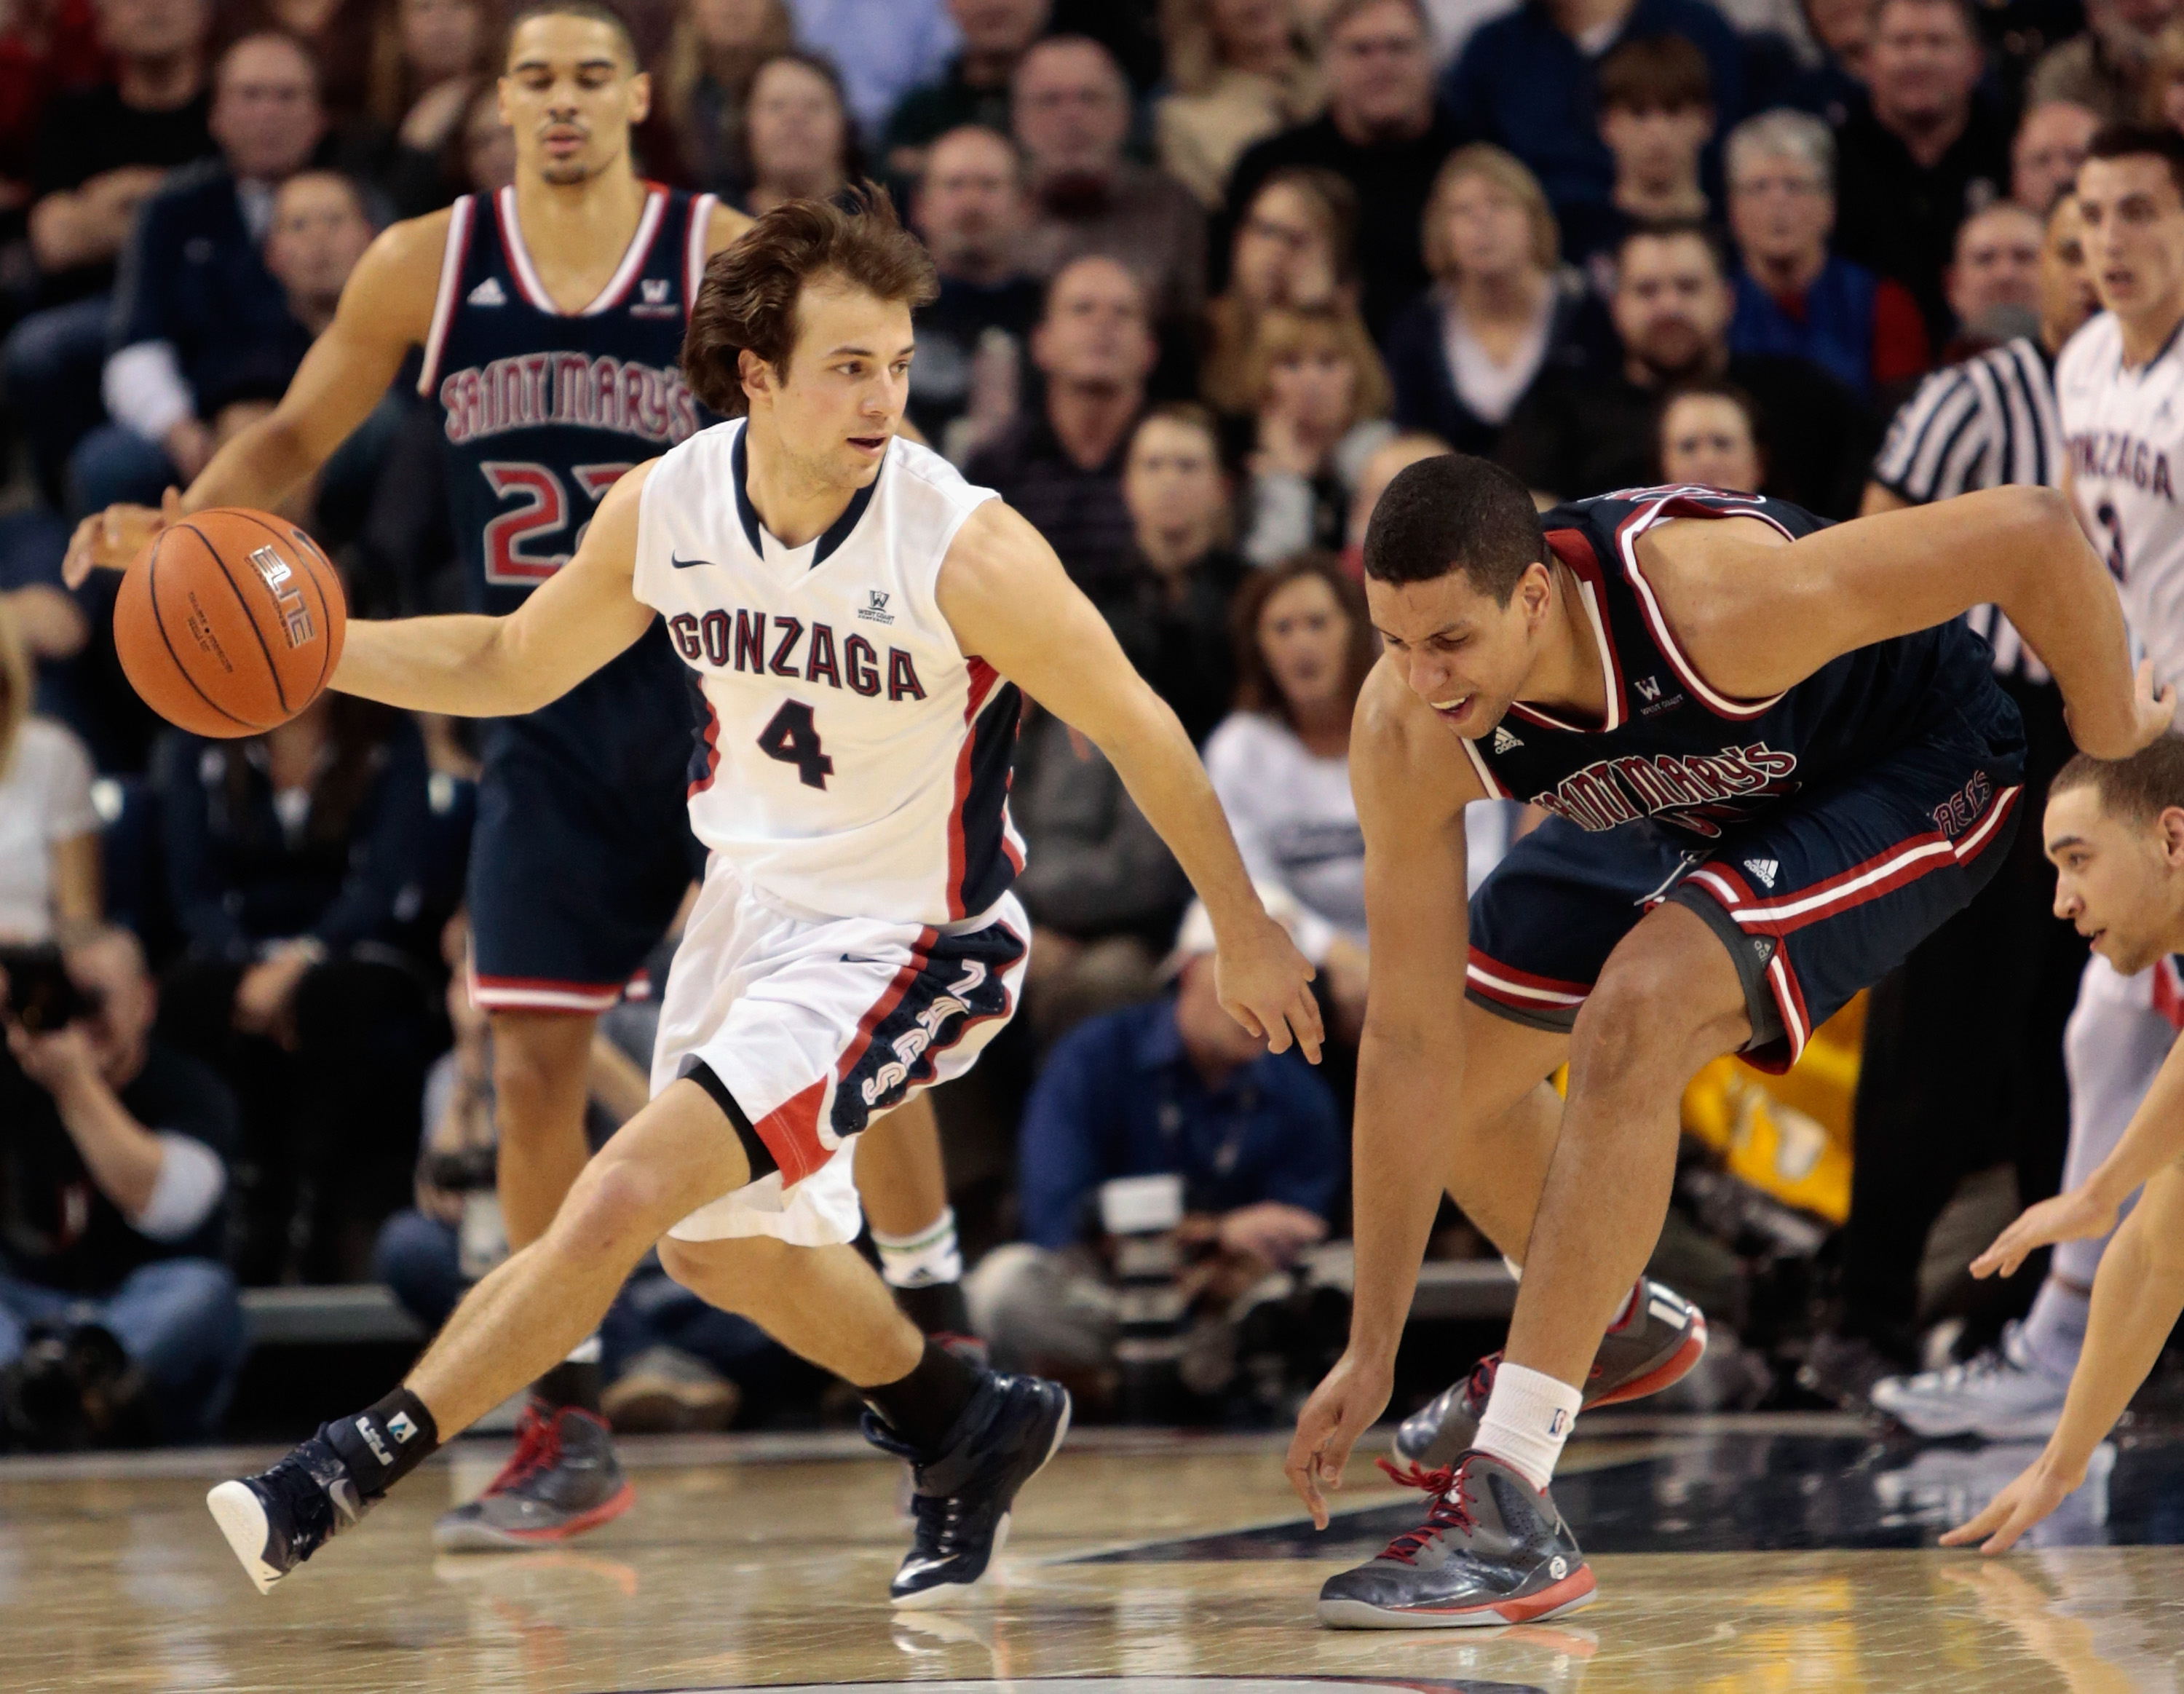 Gonzaga vs. St. Mary's Live Stream How to Watch Online for Free